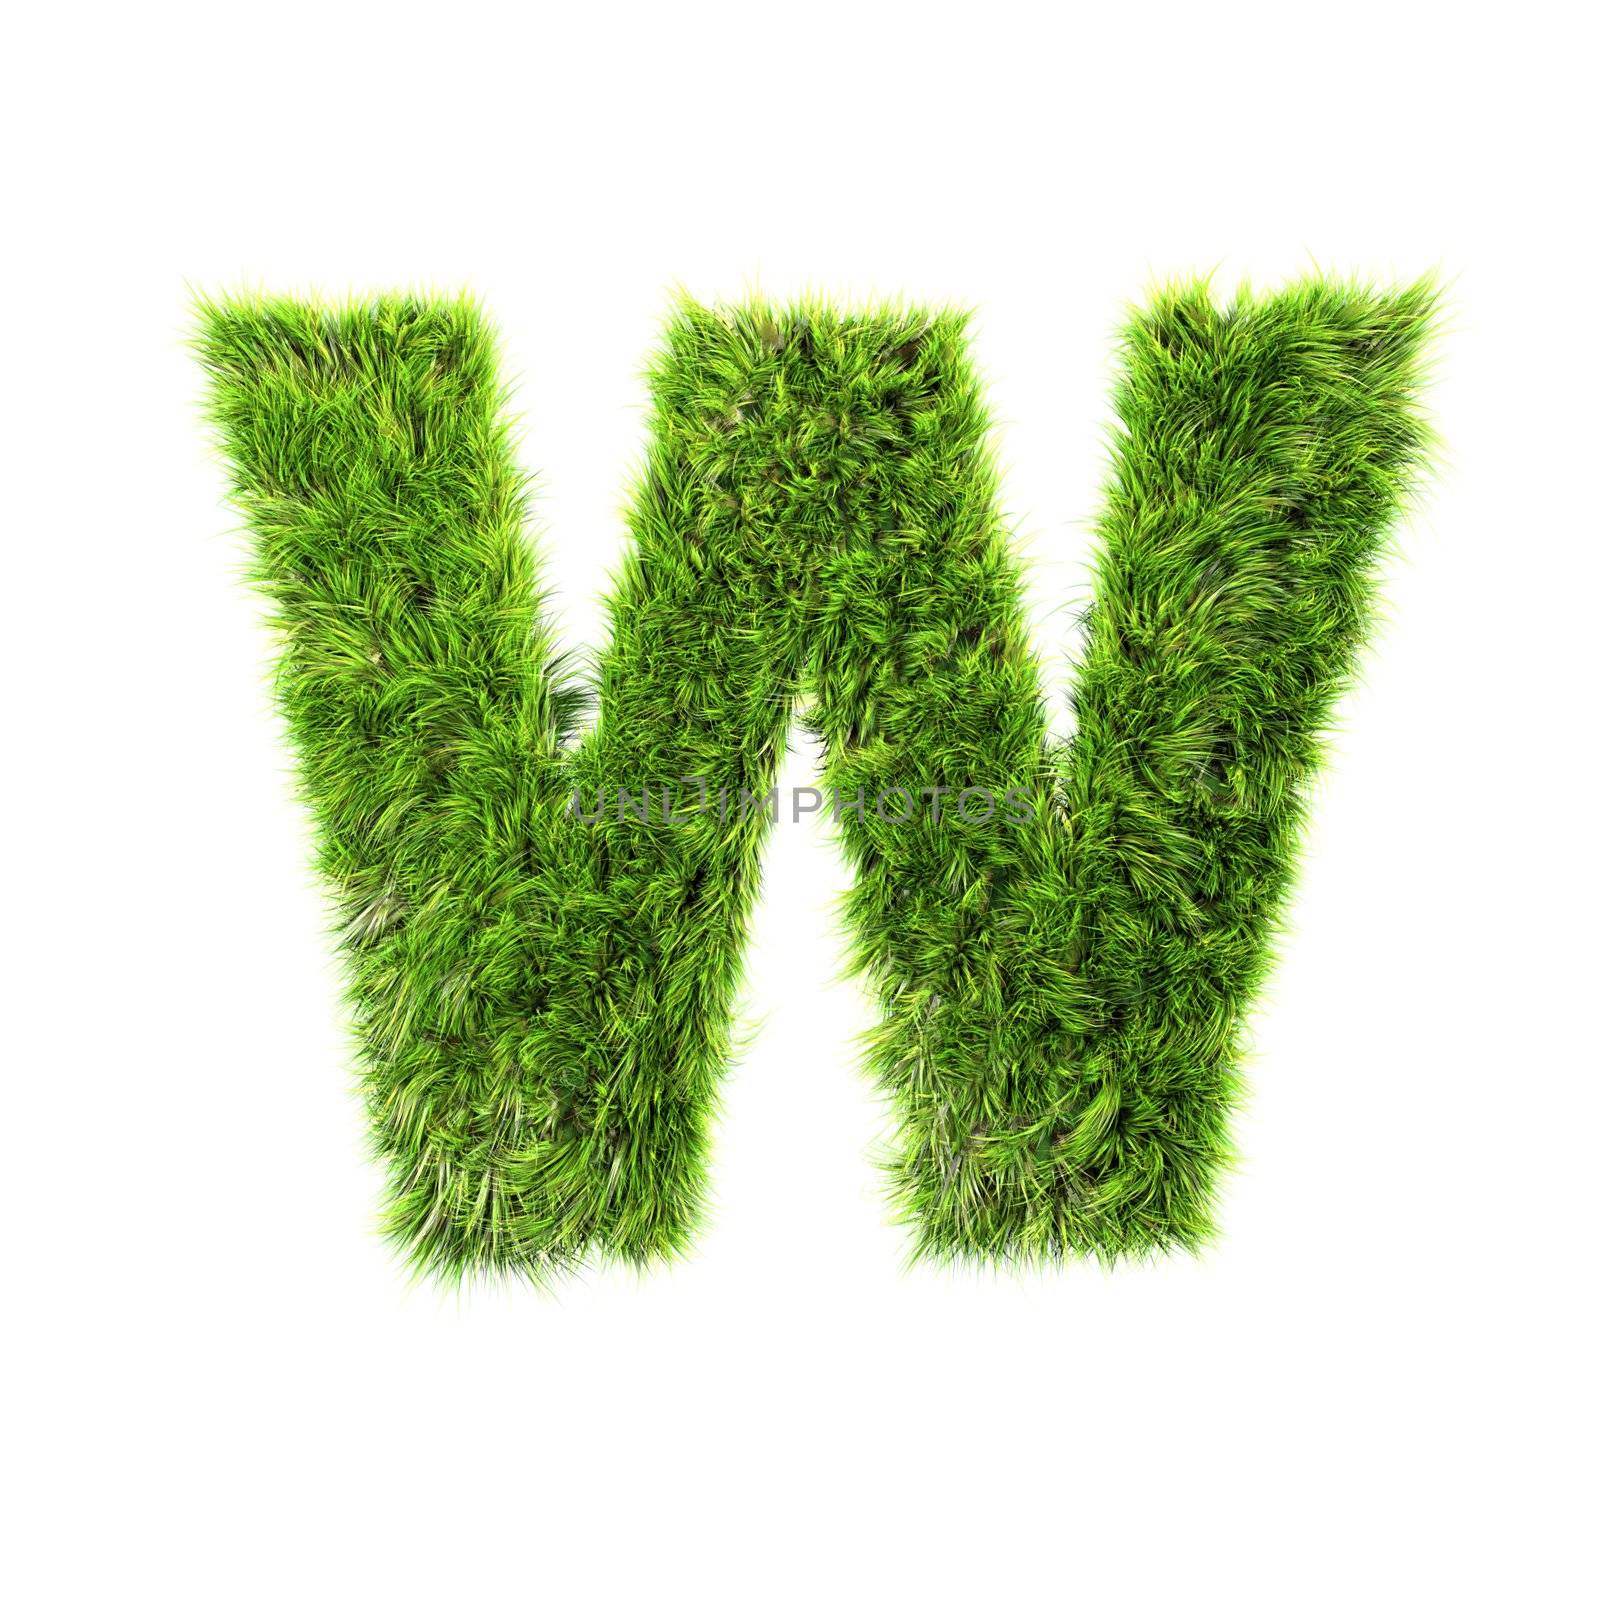 3d grass letter isolated on white background - W